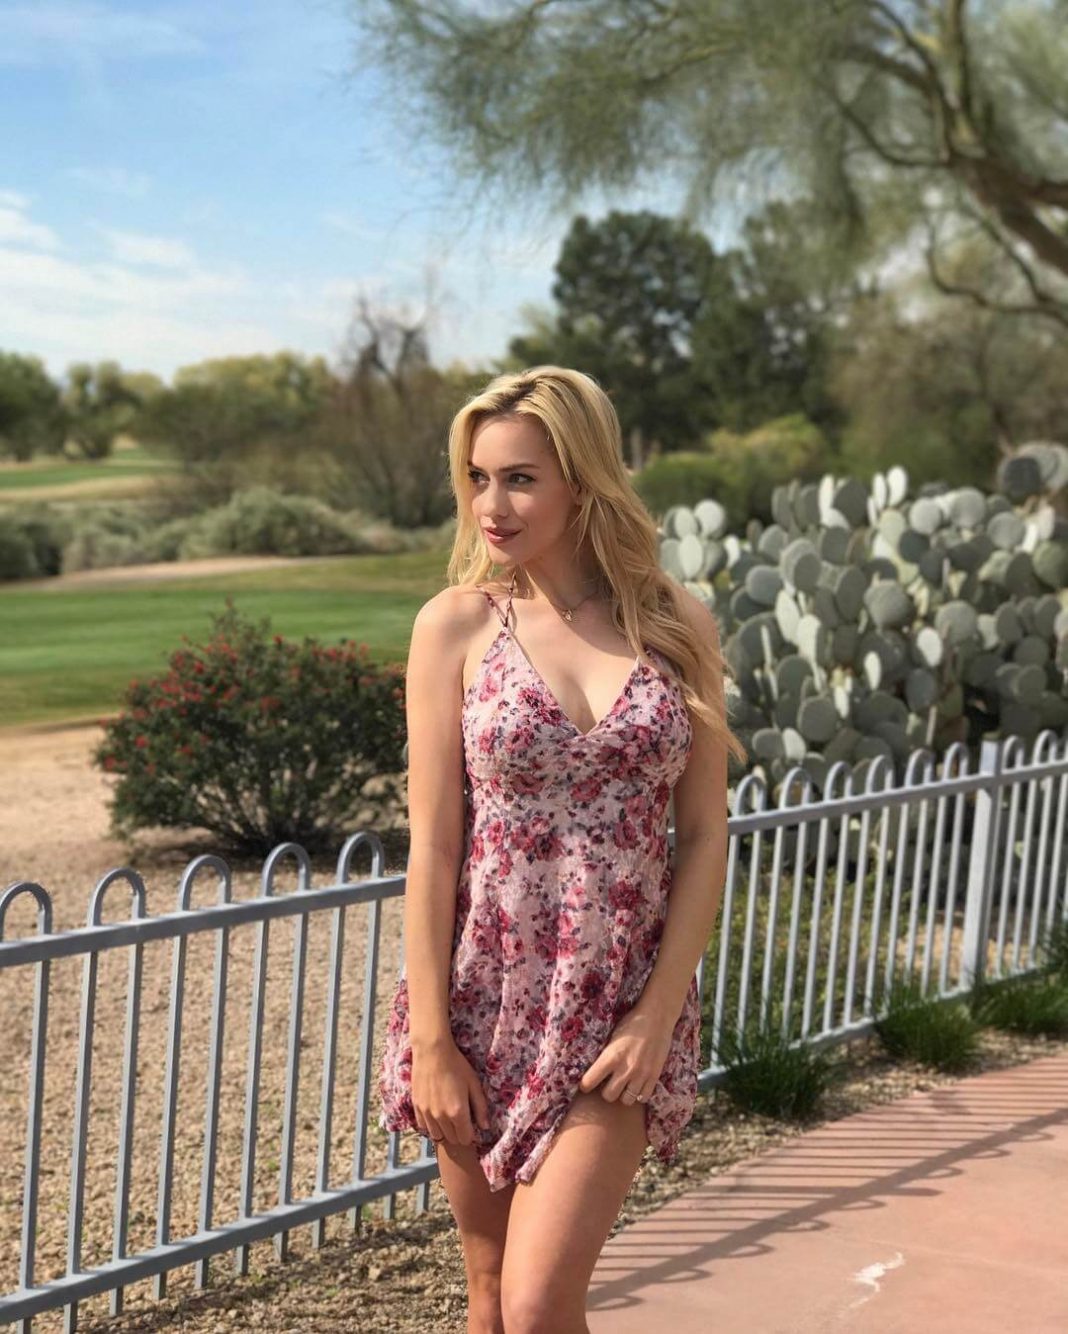 51 Paige Spiranac Nude Pictures Brings Together Style, Sassiness And Sexiness 336